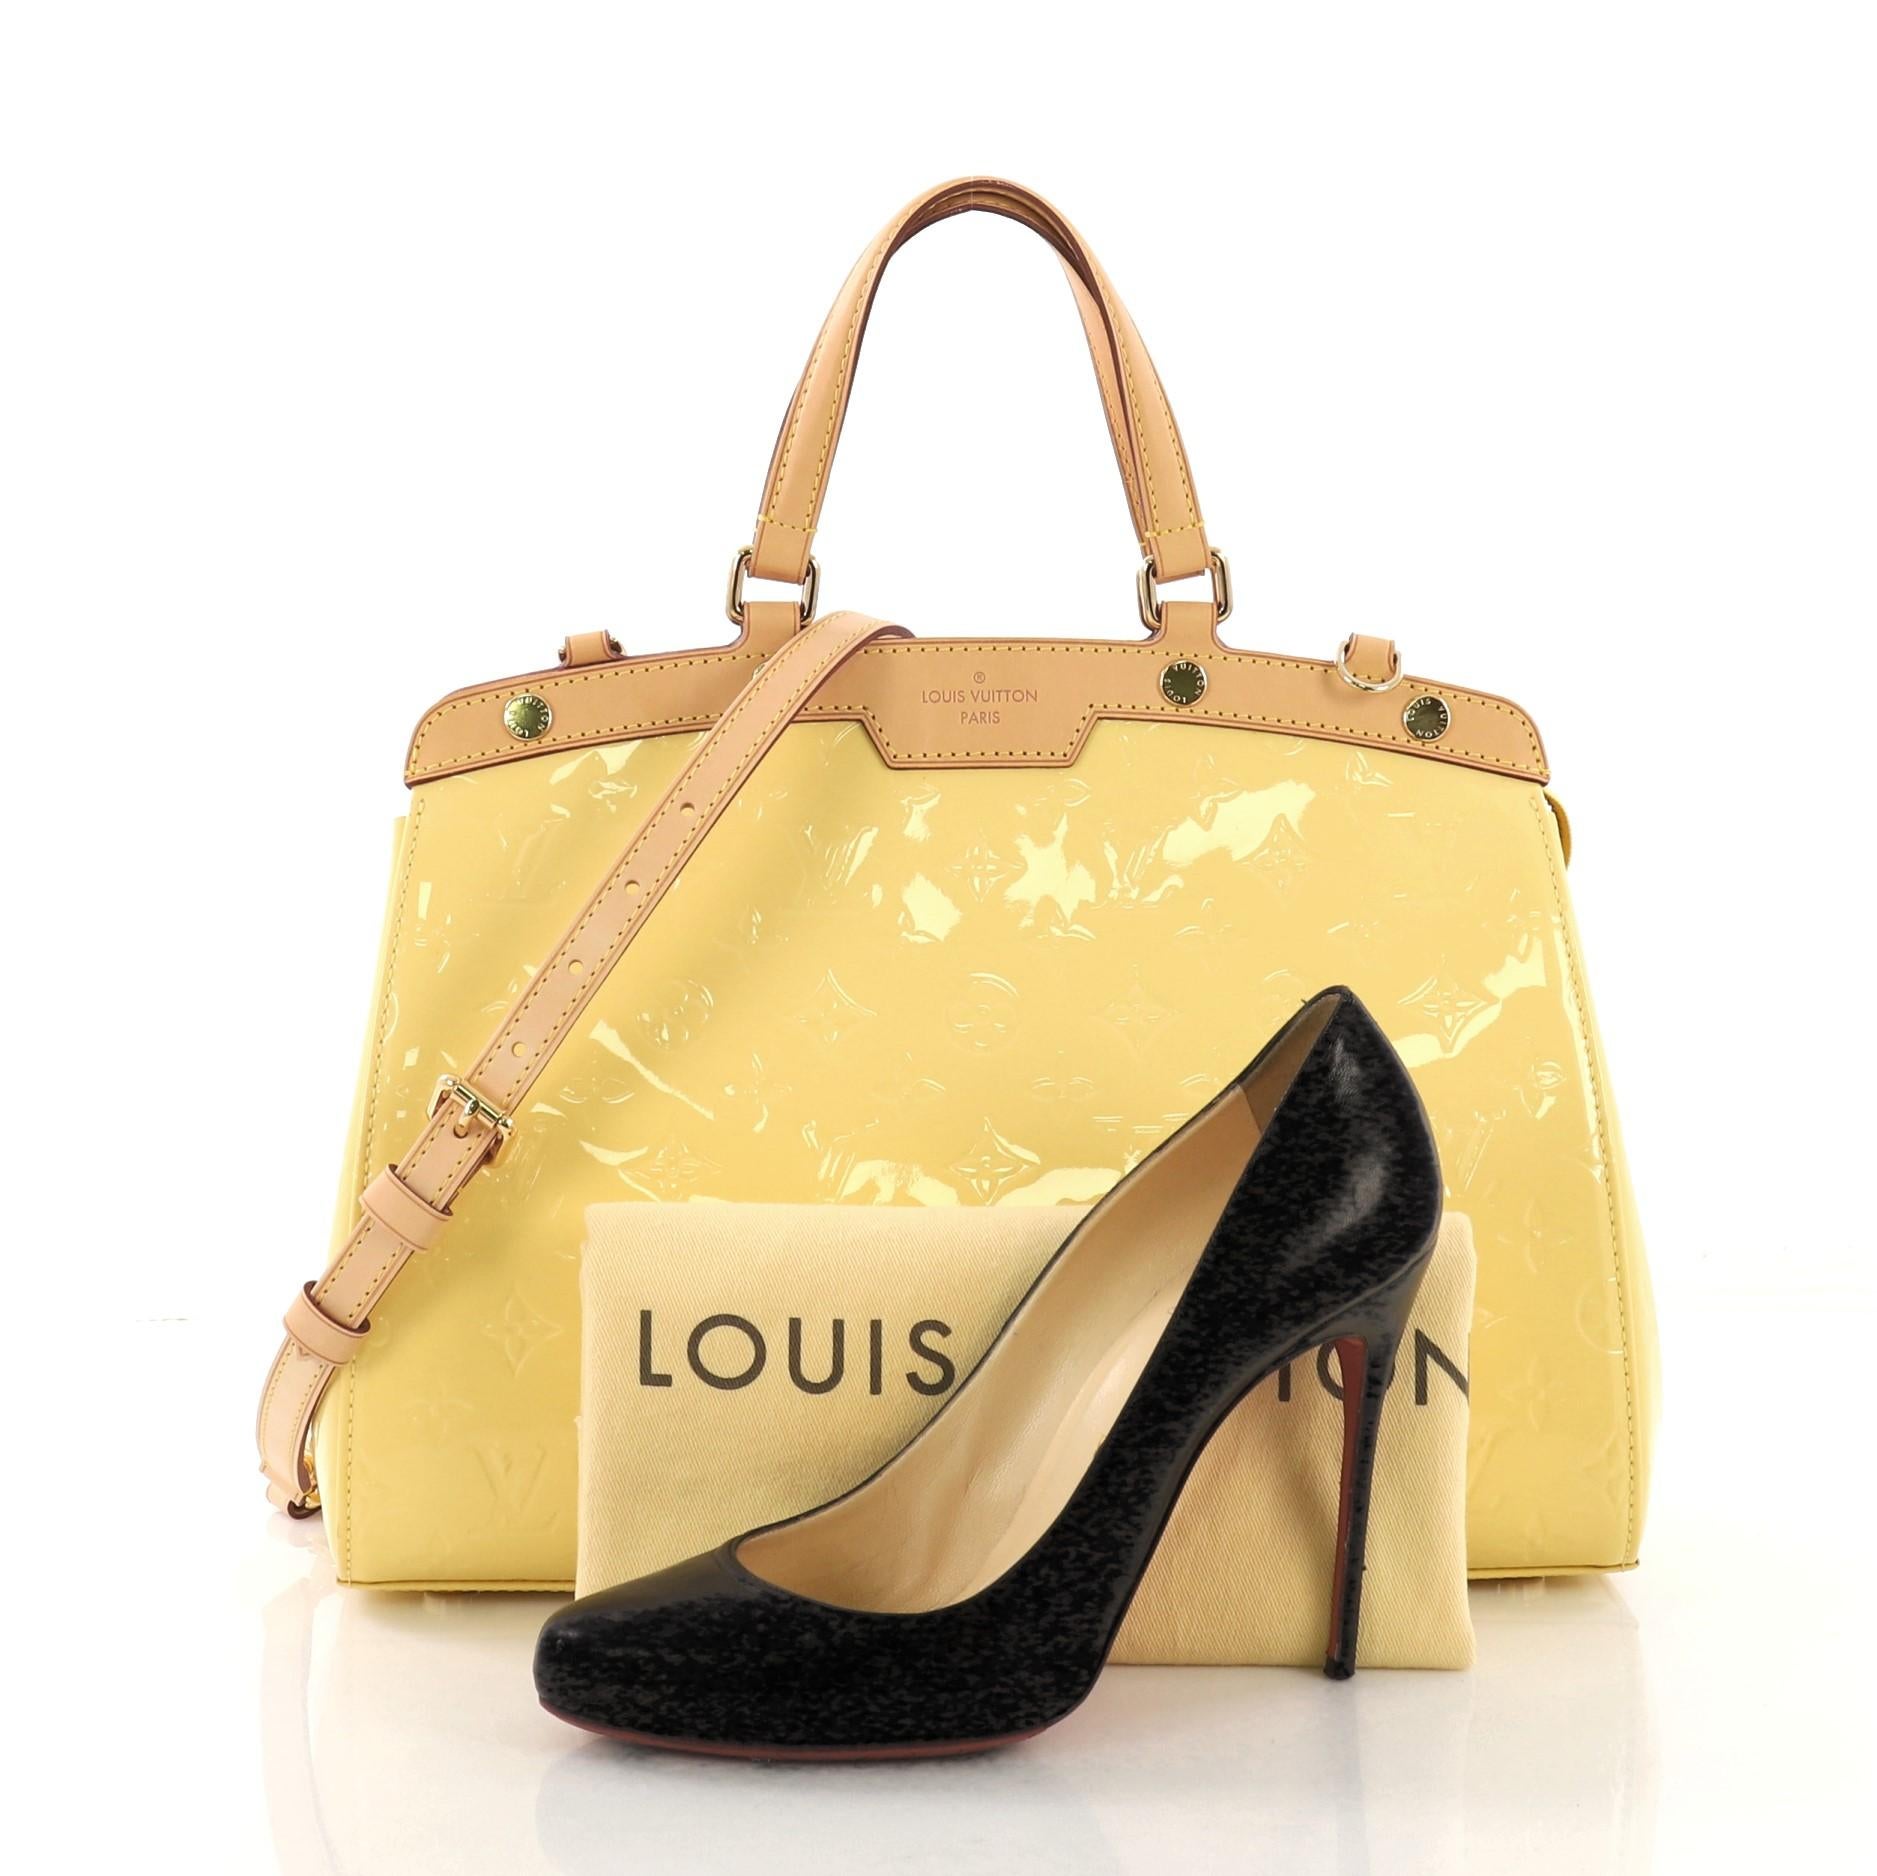 This Louis Vuitton Brea Handbag Monogram Vernis MM, crafted in yellow monogram vernis leather with cowhide leather trim, features dual flat handles, protective base studs, and gold-tone hardware. Its top zip closure opens to a yellow fabric interior